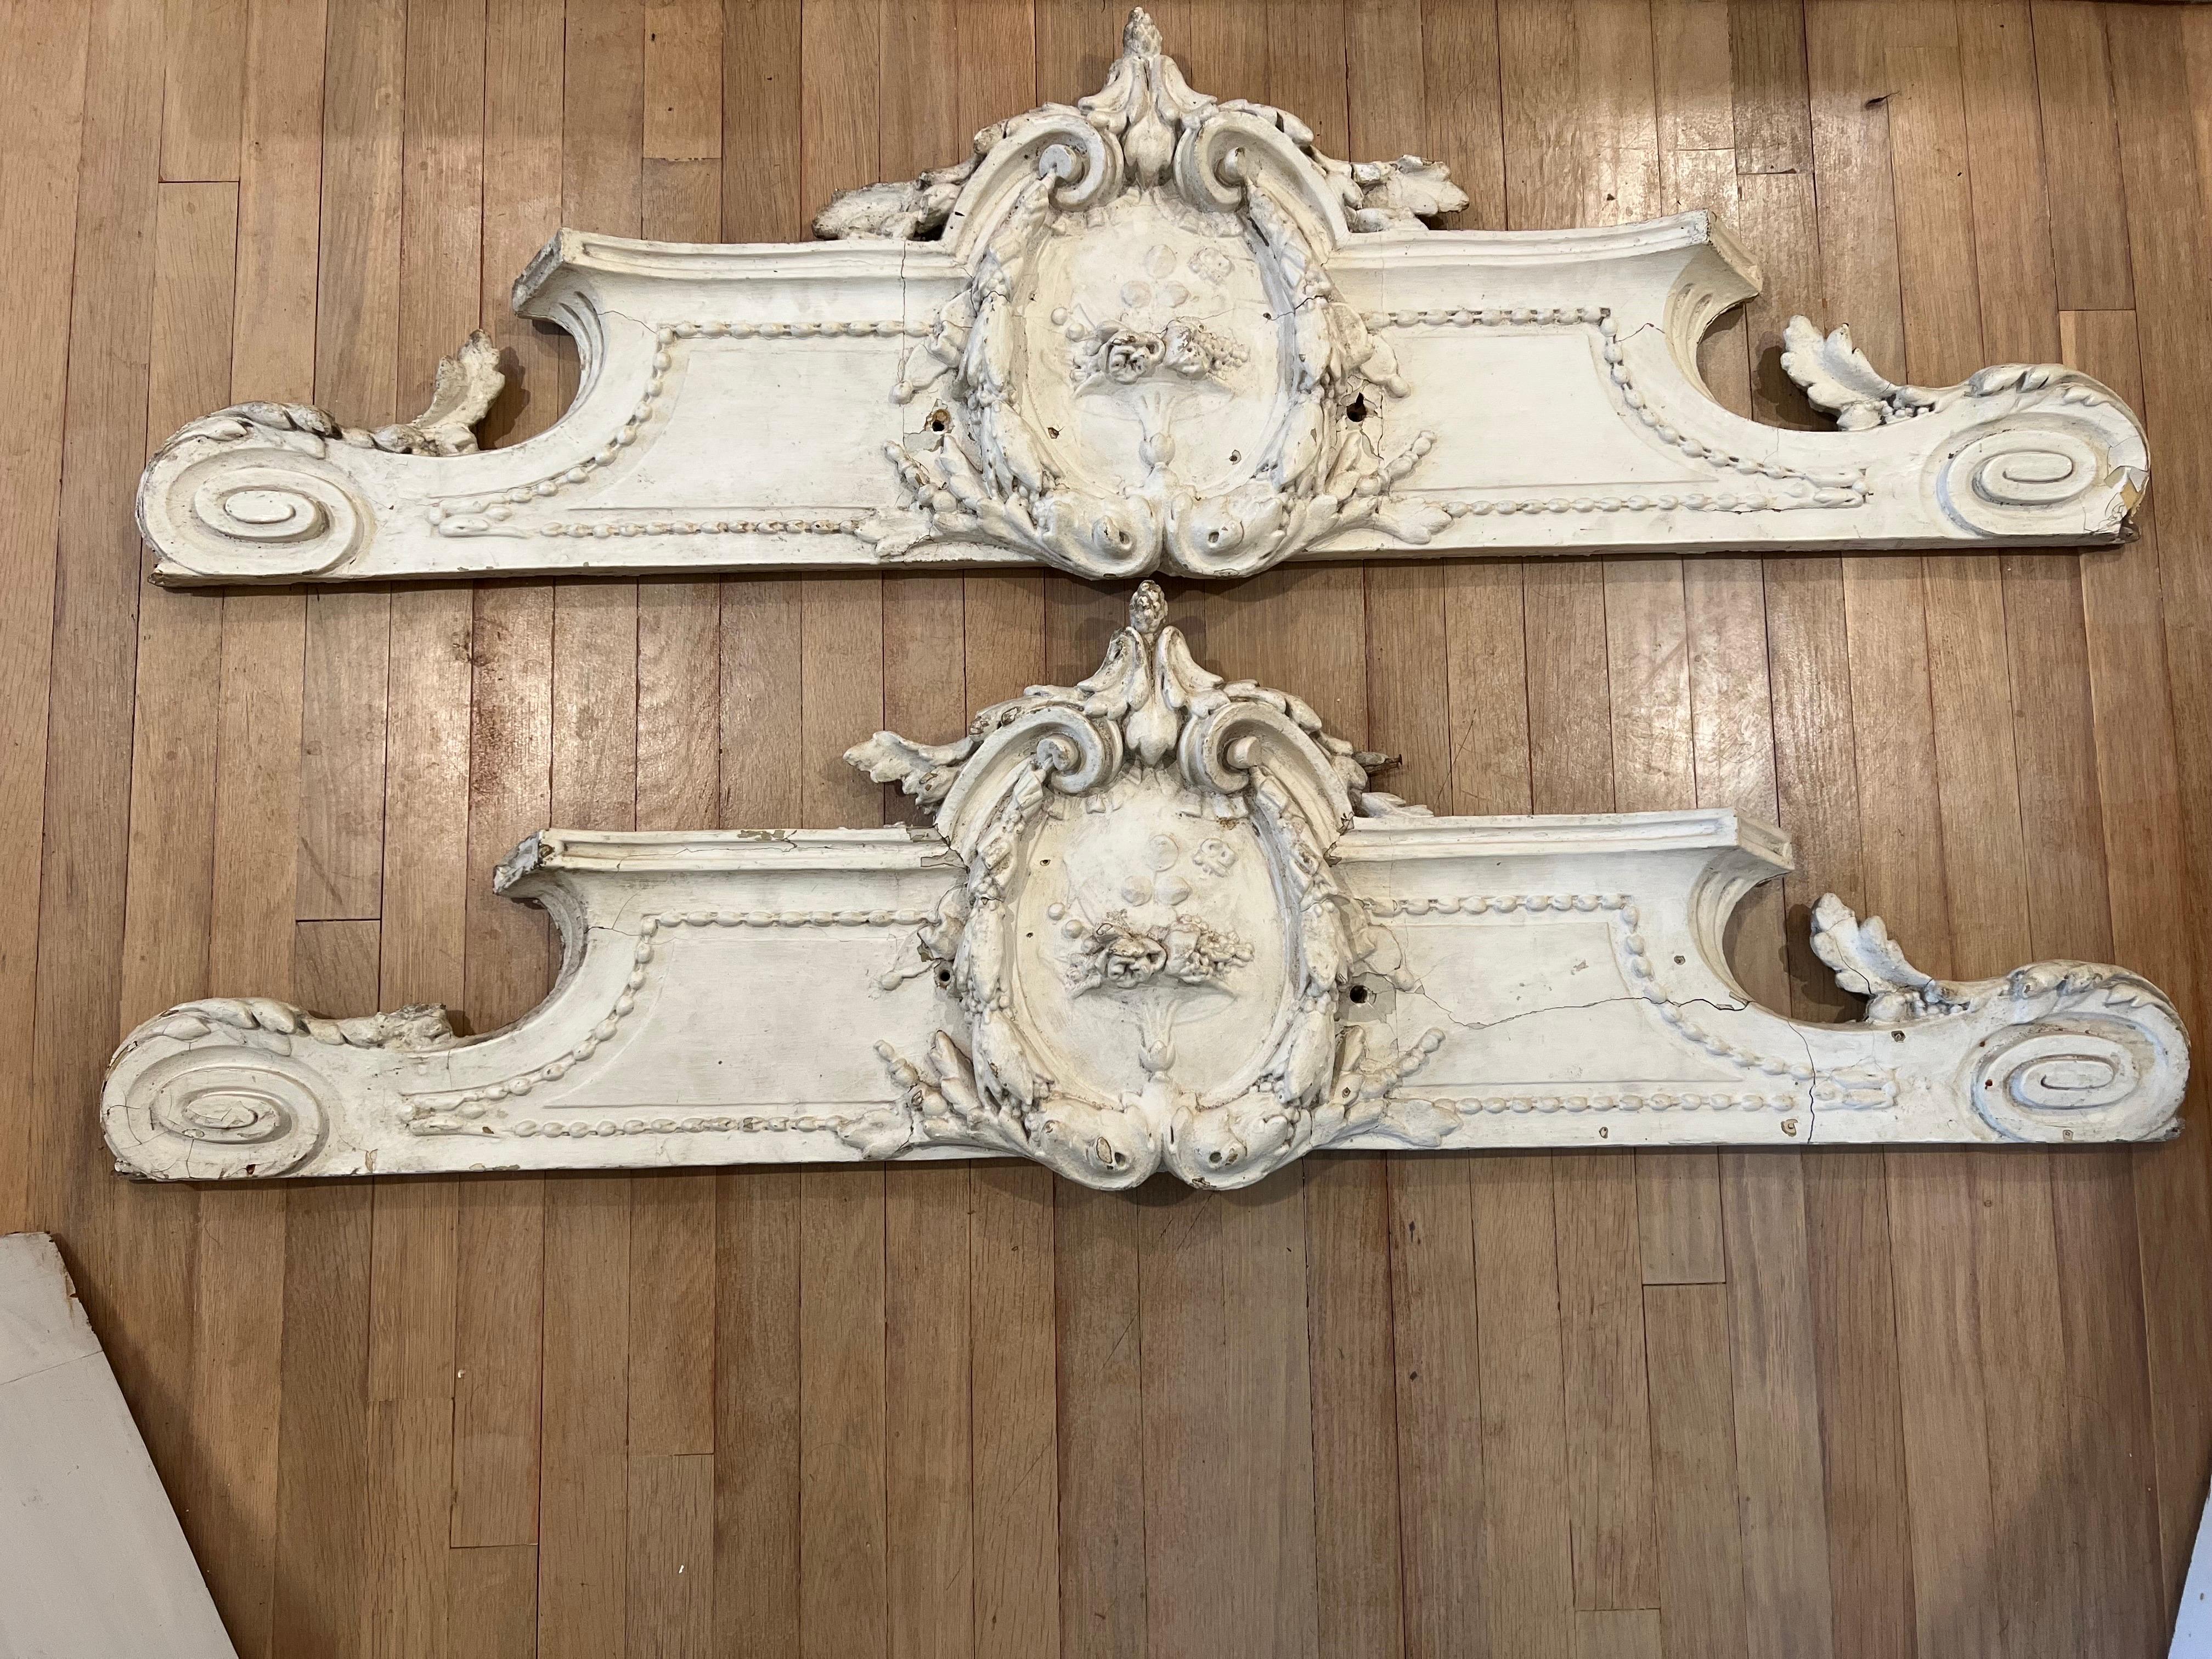 Gorgeous pair of Antique Carved French Pediments in a creamy white patina.  
Could be used on the wall as a relief or over a doorway to ad interest.  

See images for condition.  These are old and show signs consistent as such. 